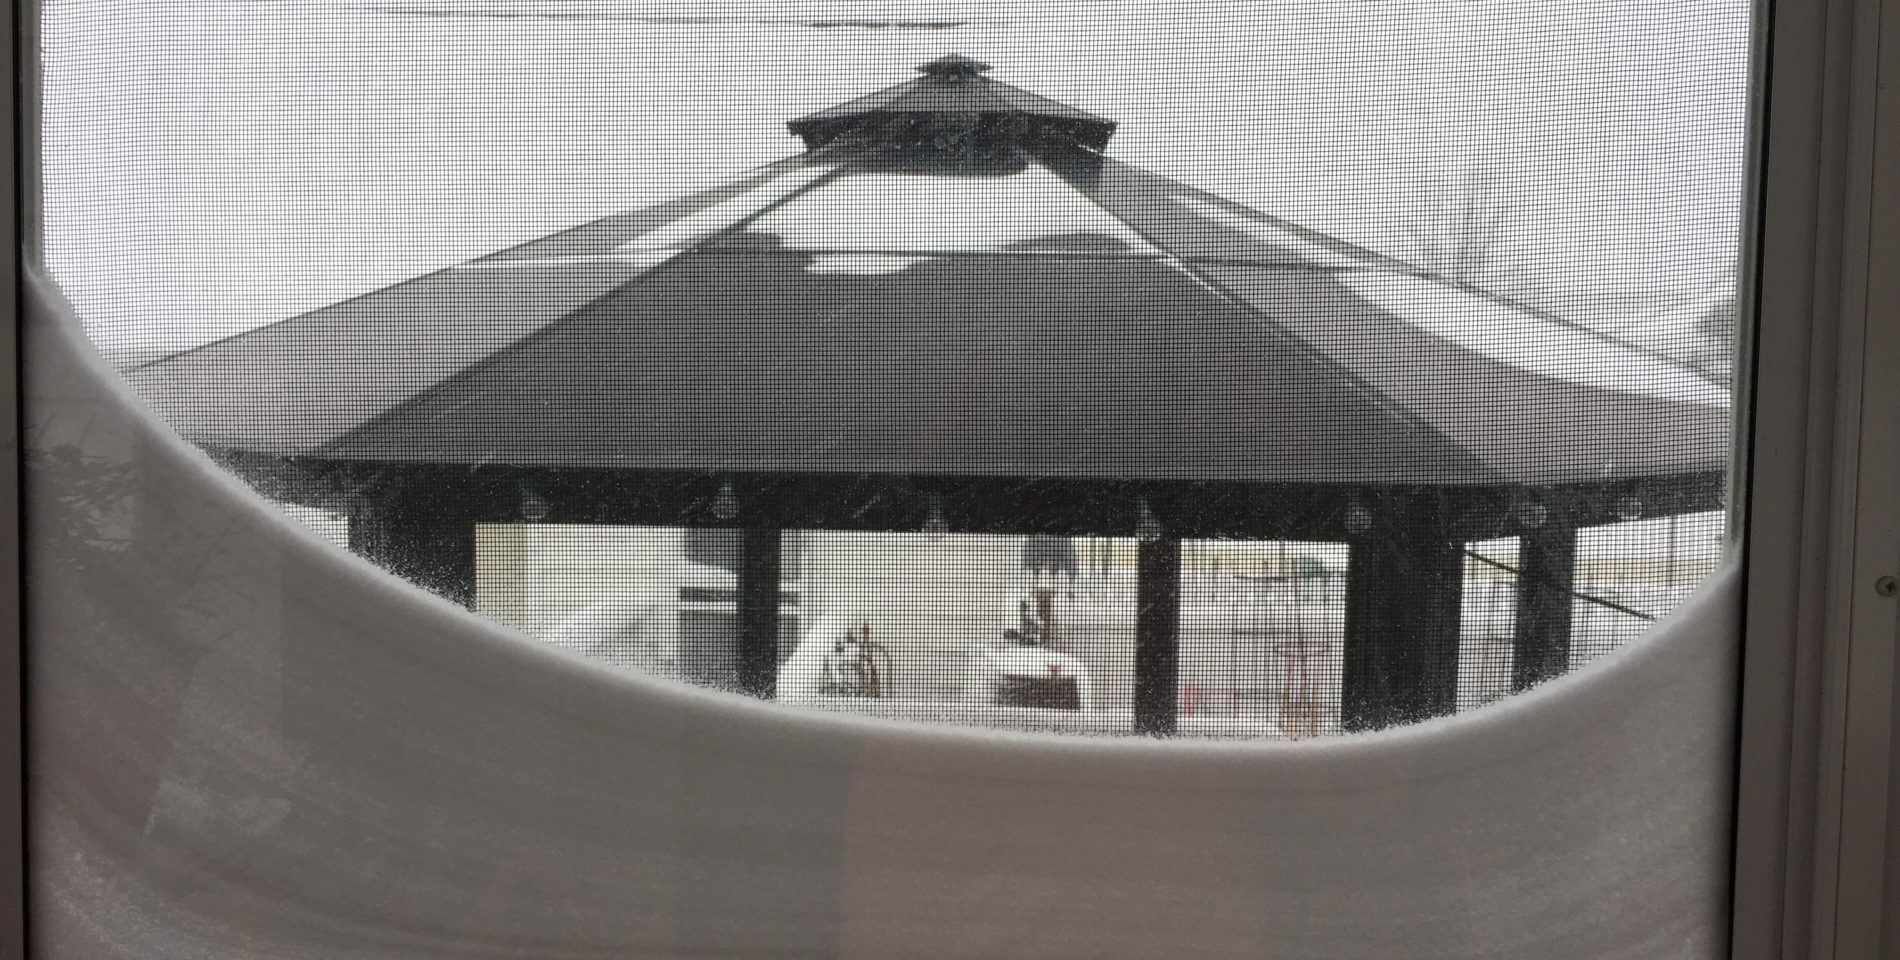 Snow lining the windowsill at the Inn with a white snow covered gazebo in the background.